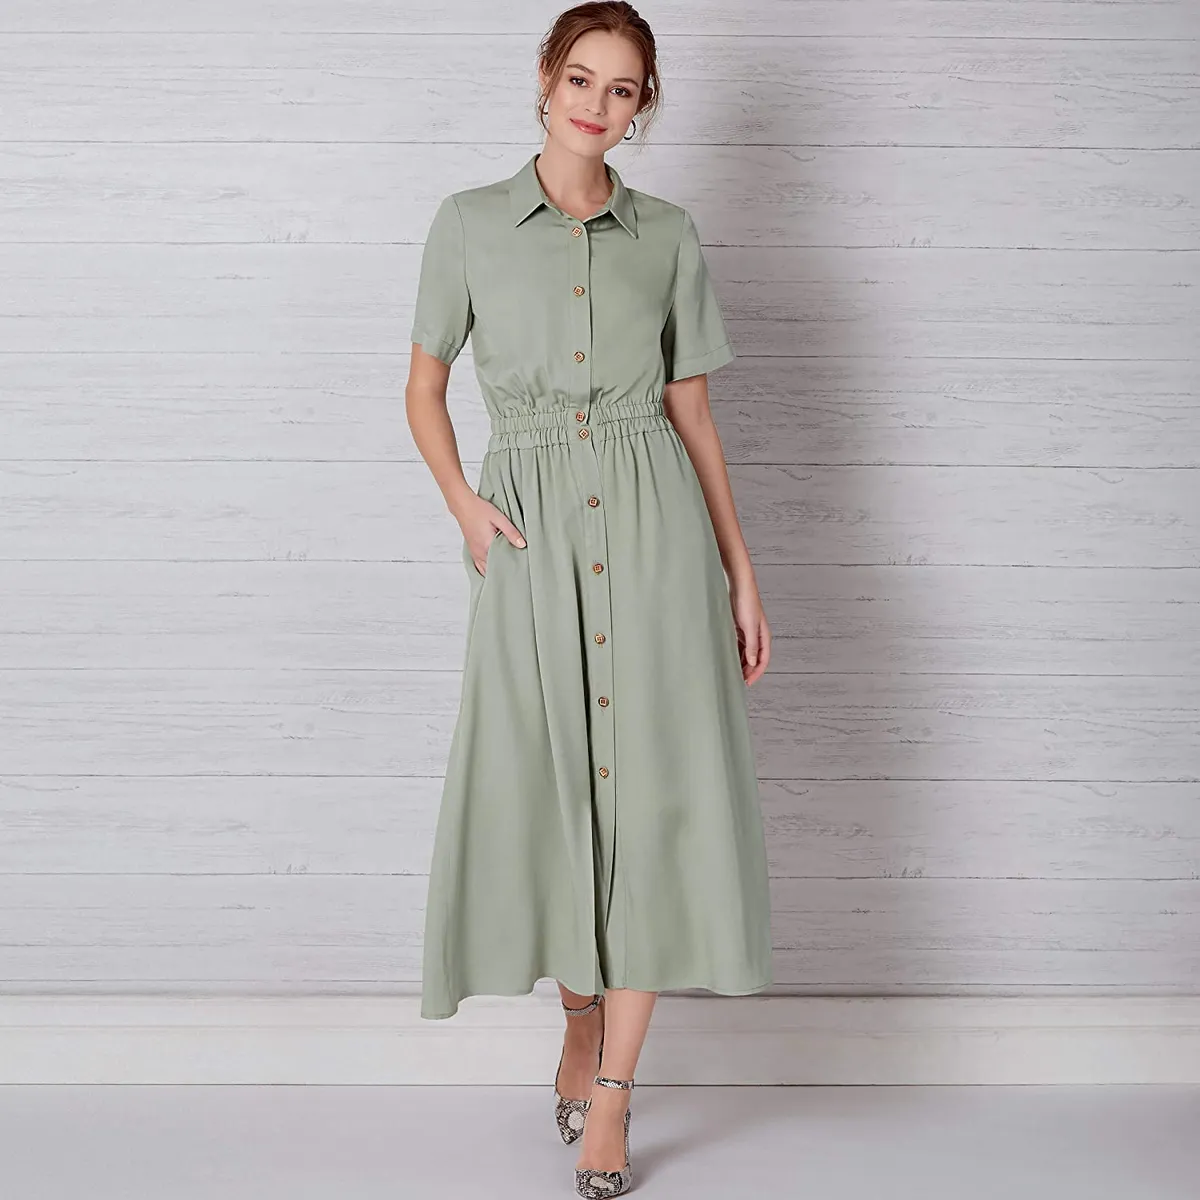 New Look Misses Button Front Dress Pattern